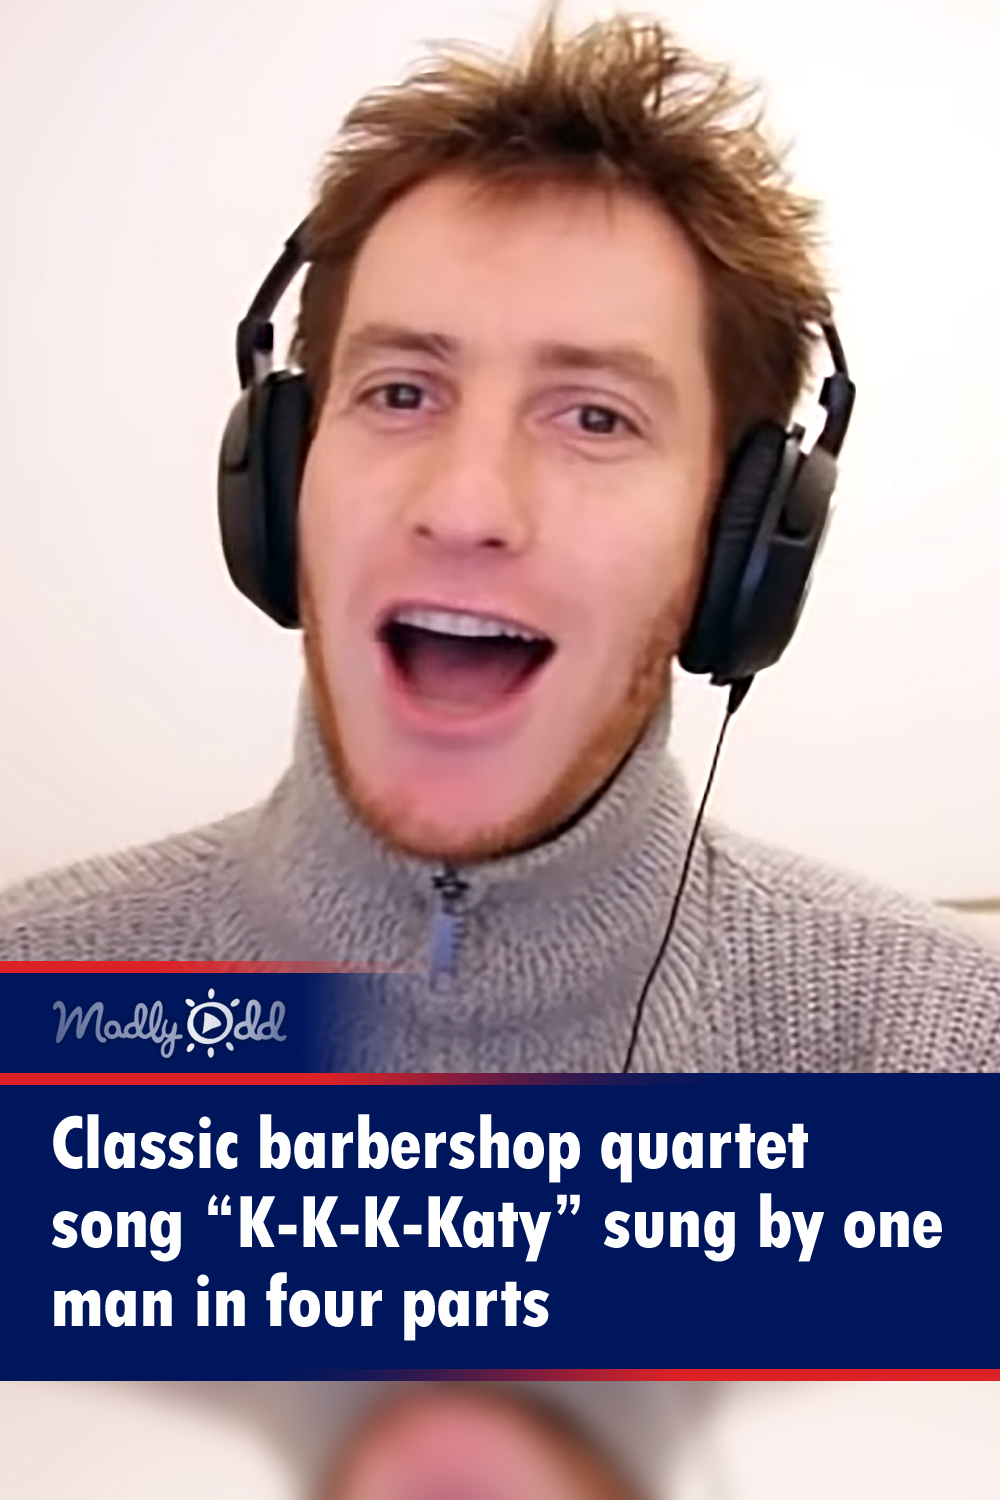 Classic barbershop quartet song “K-K-K-Katy” sung by one man in four parts